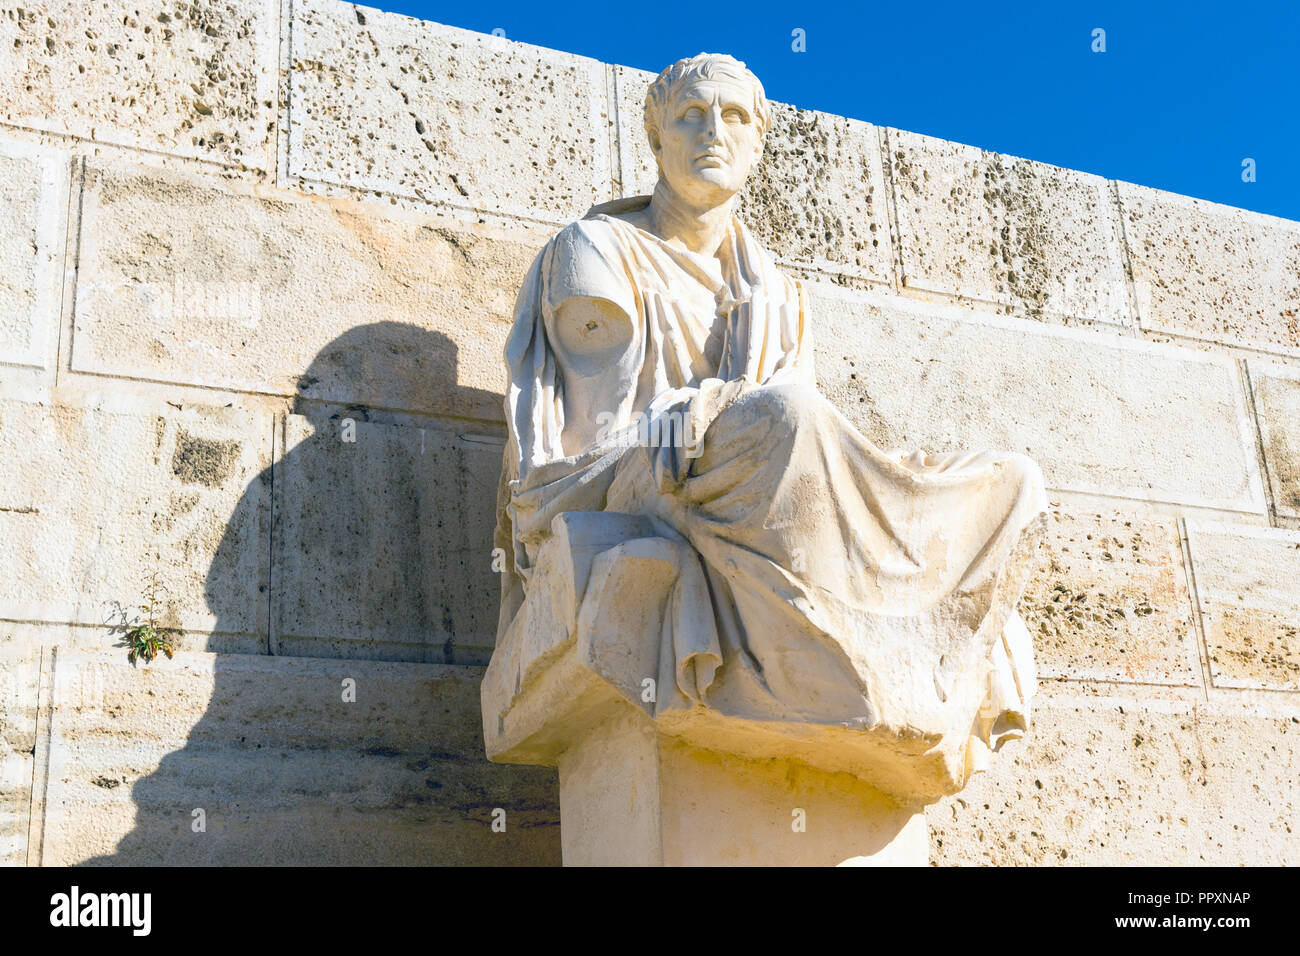 Statue of Menander at Acropolis, Athens, Greece Stock Photo